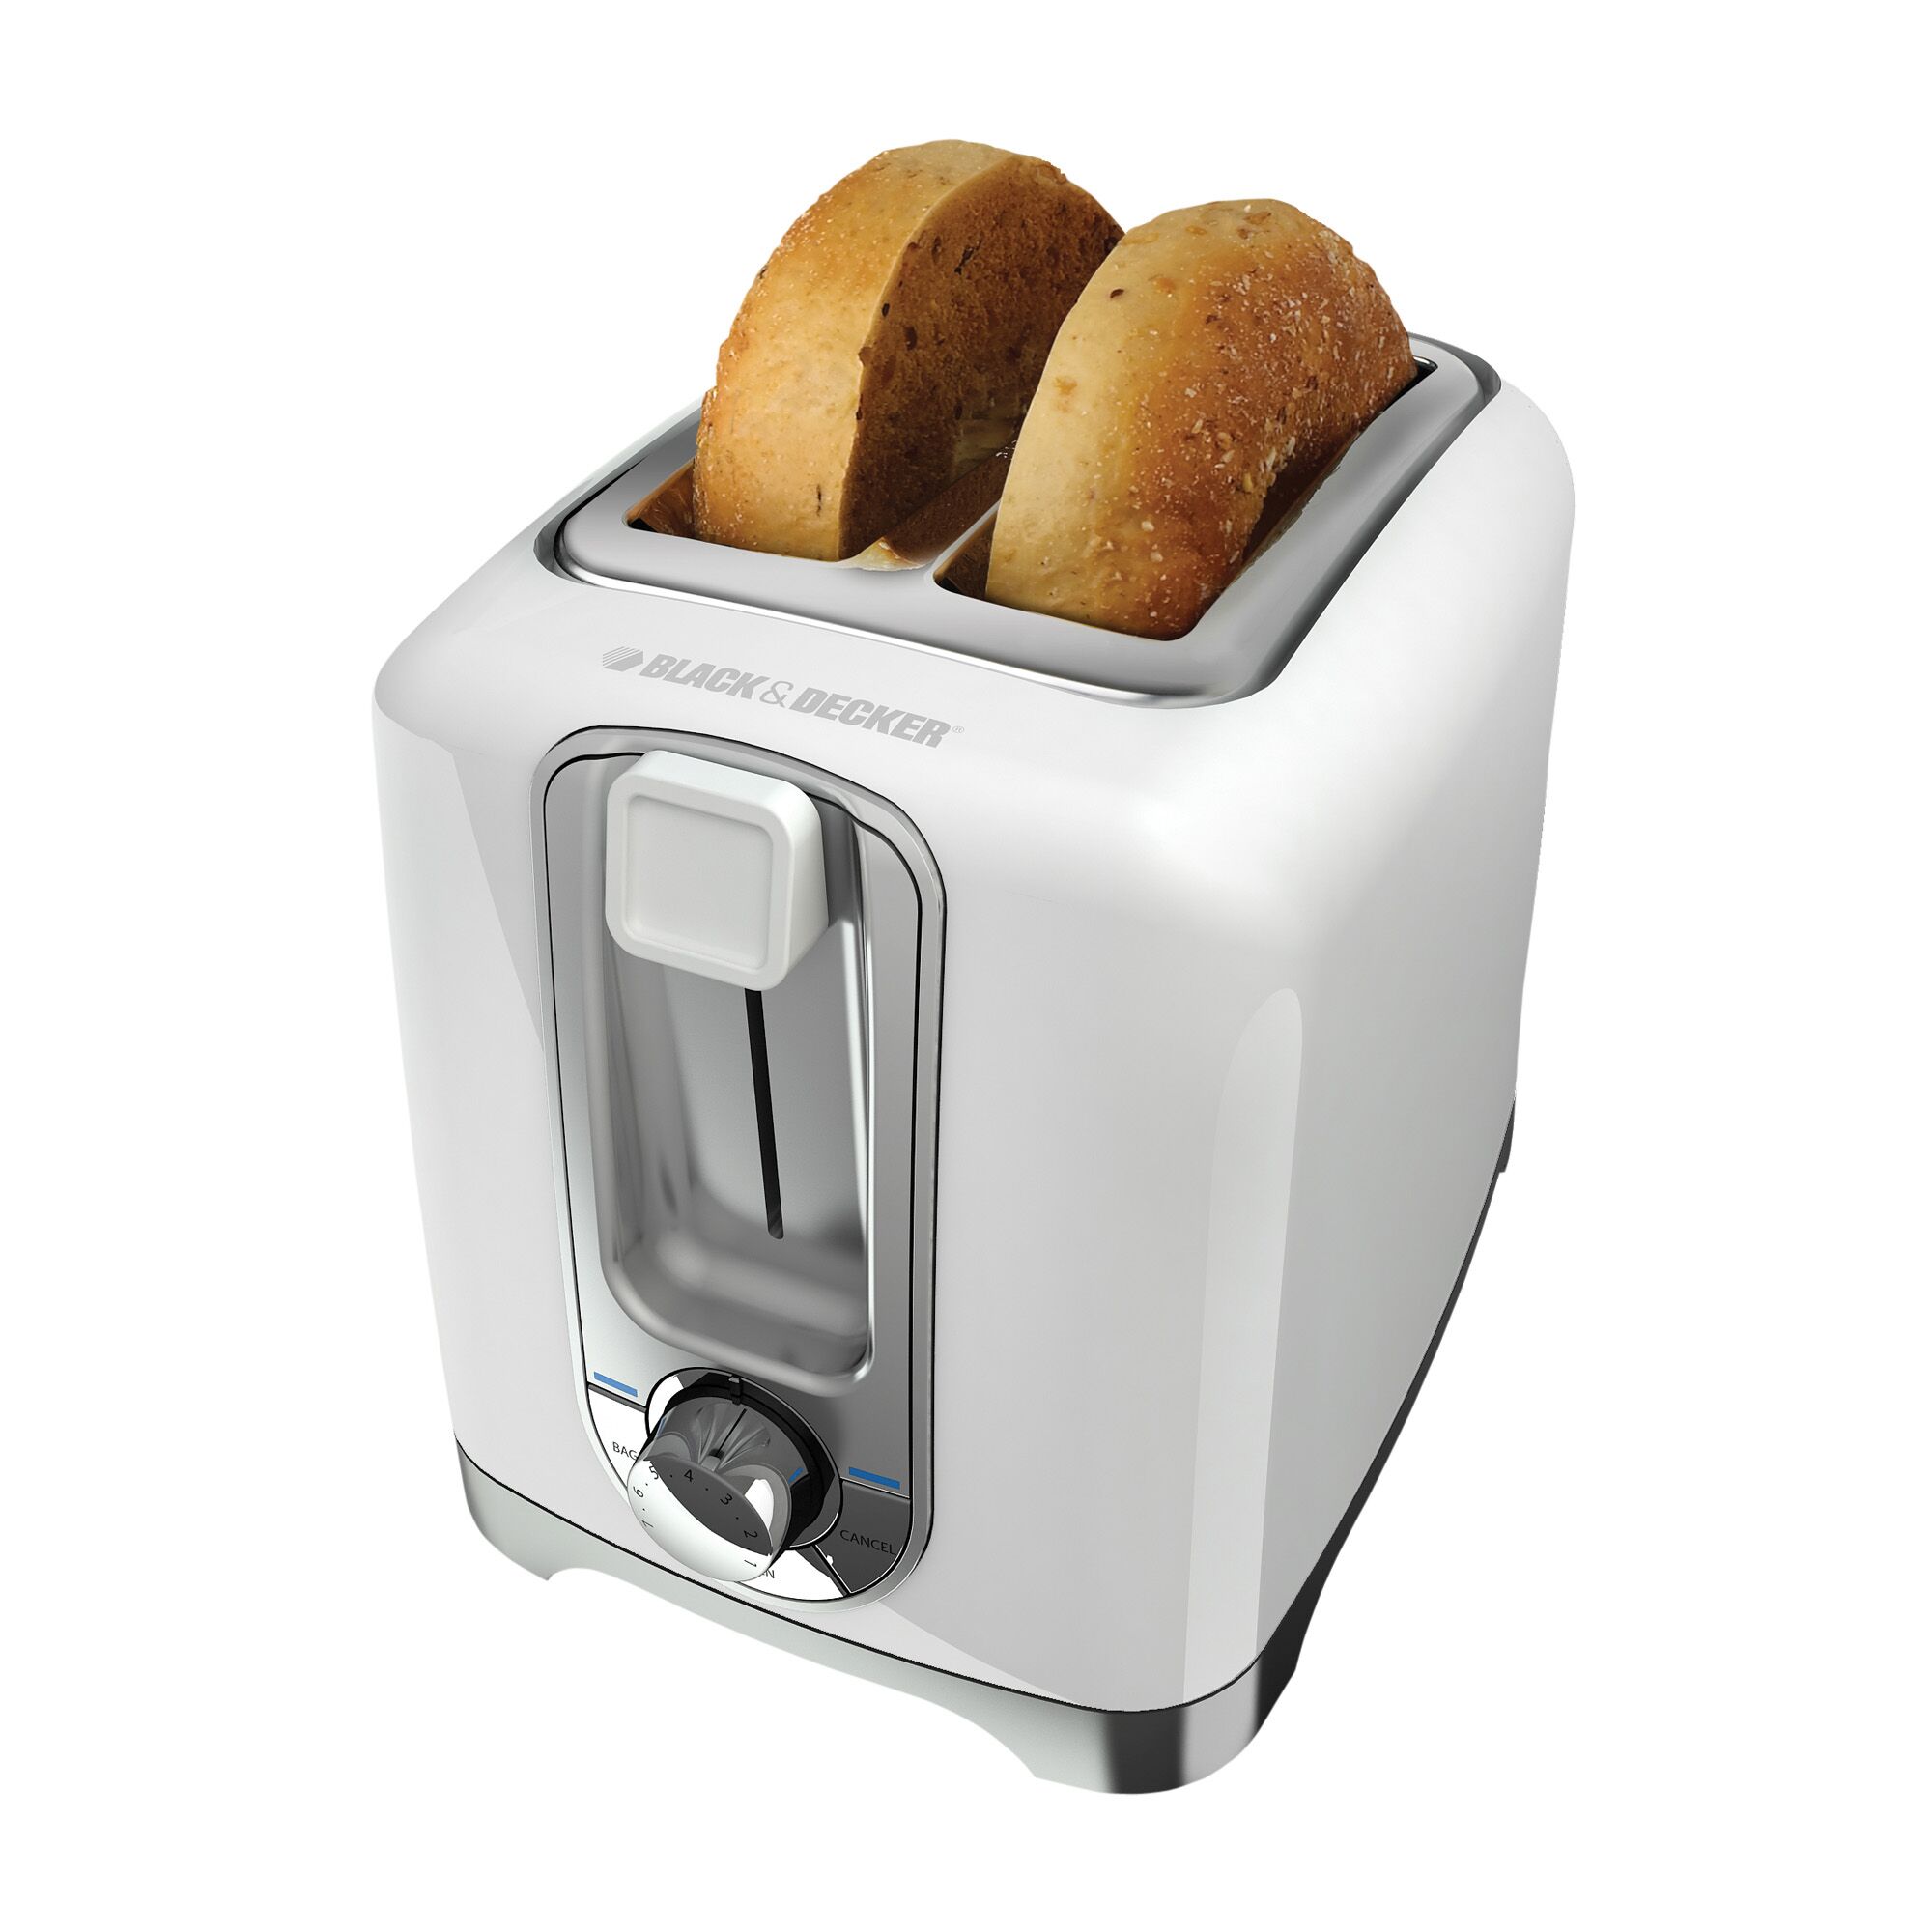 Overhead view of 2 Slice toaster.